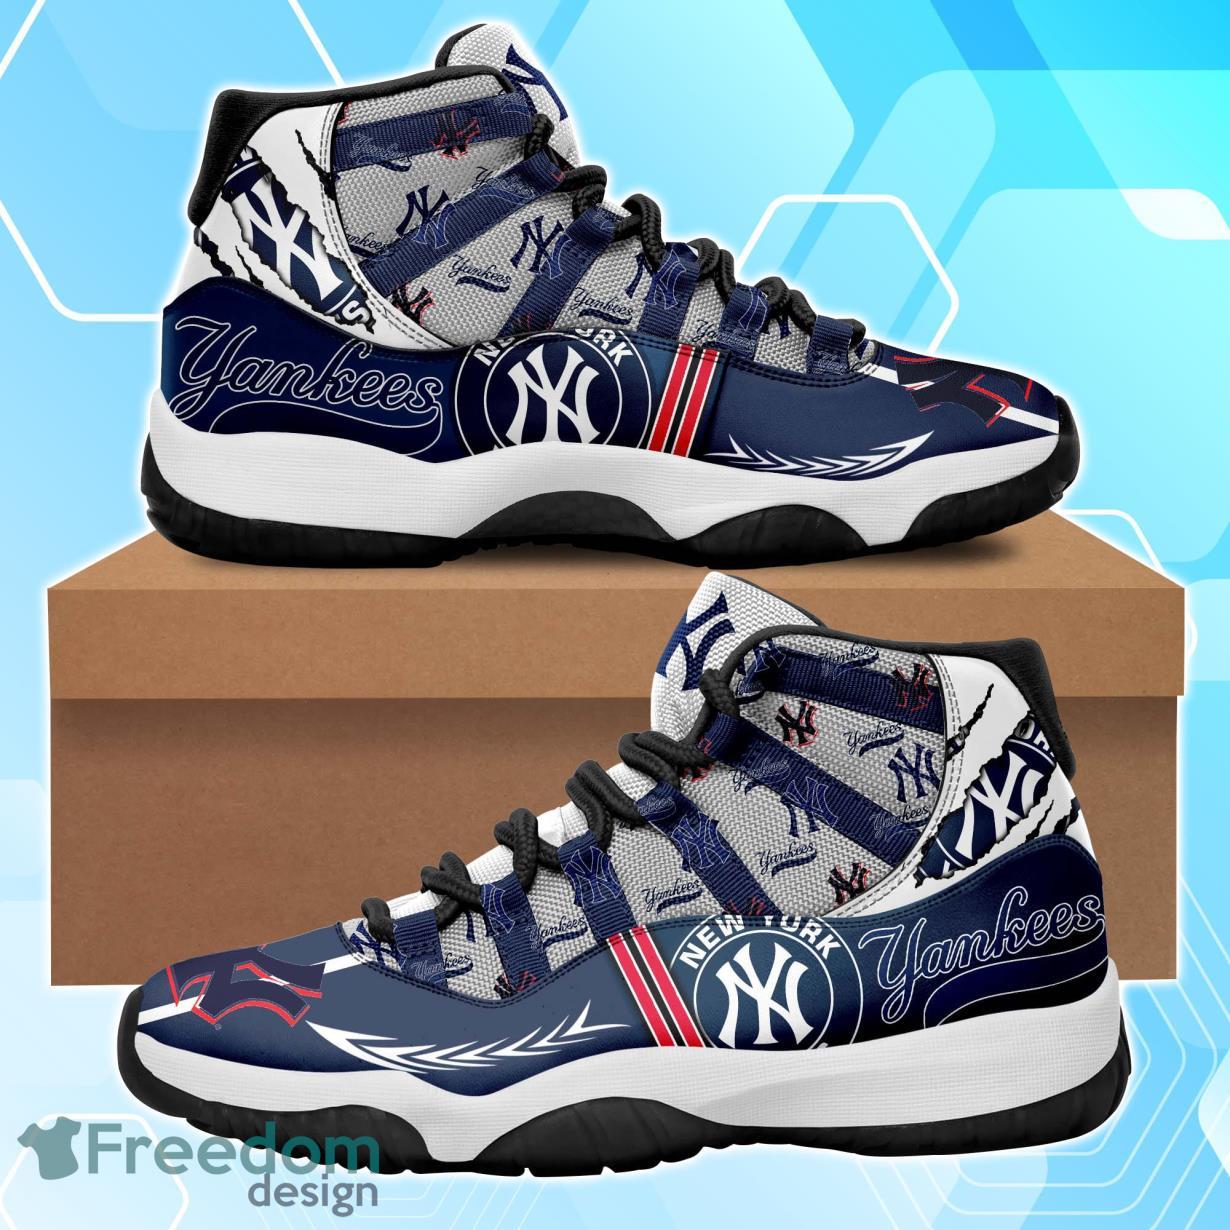 New York Yankees Two Color Shoes Sneakers Air Jordan 13 For Fans